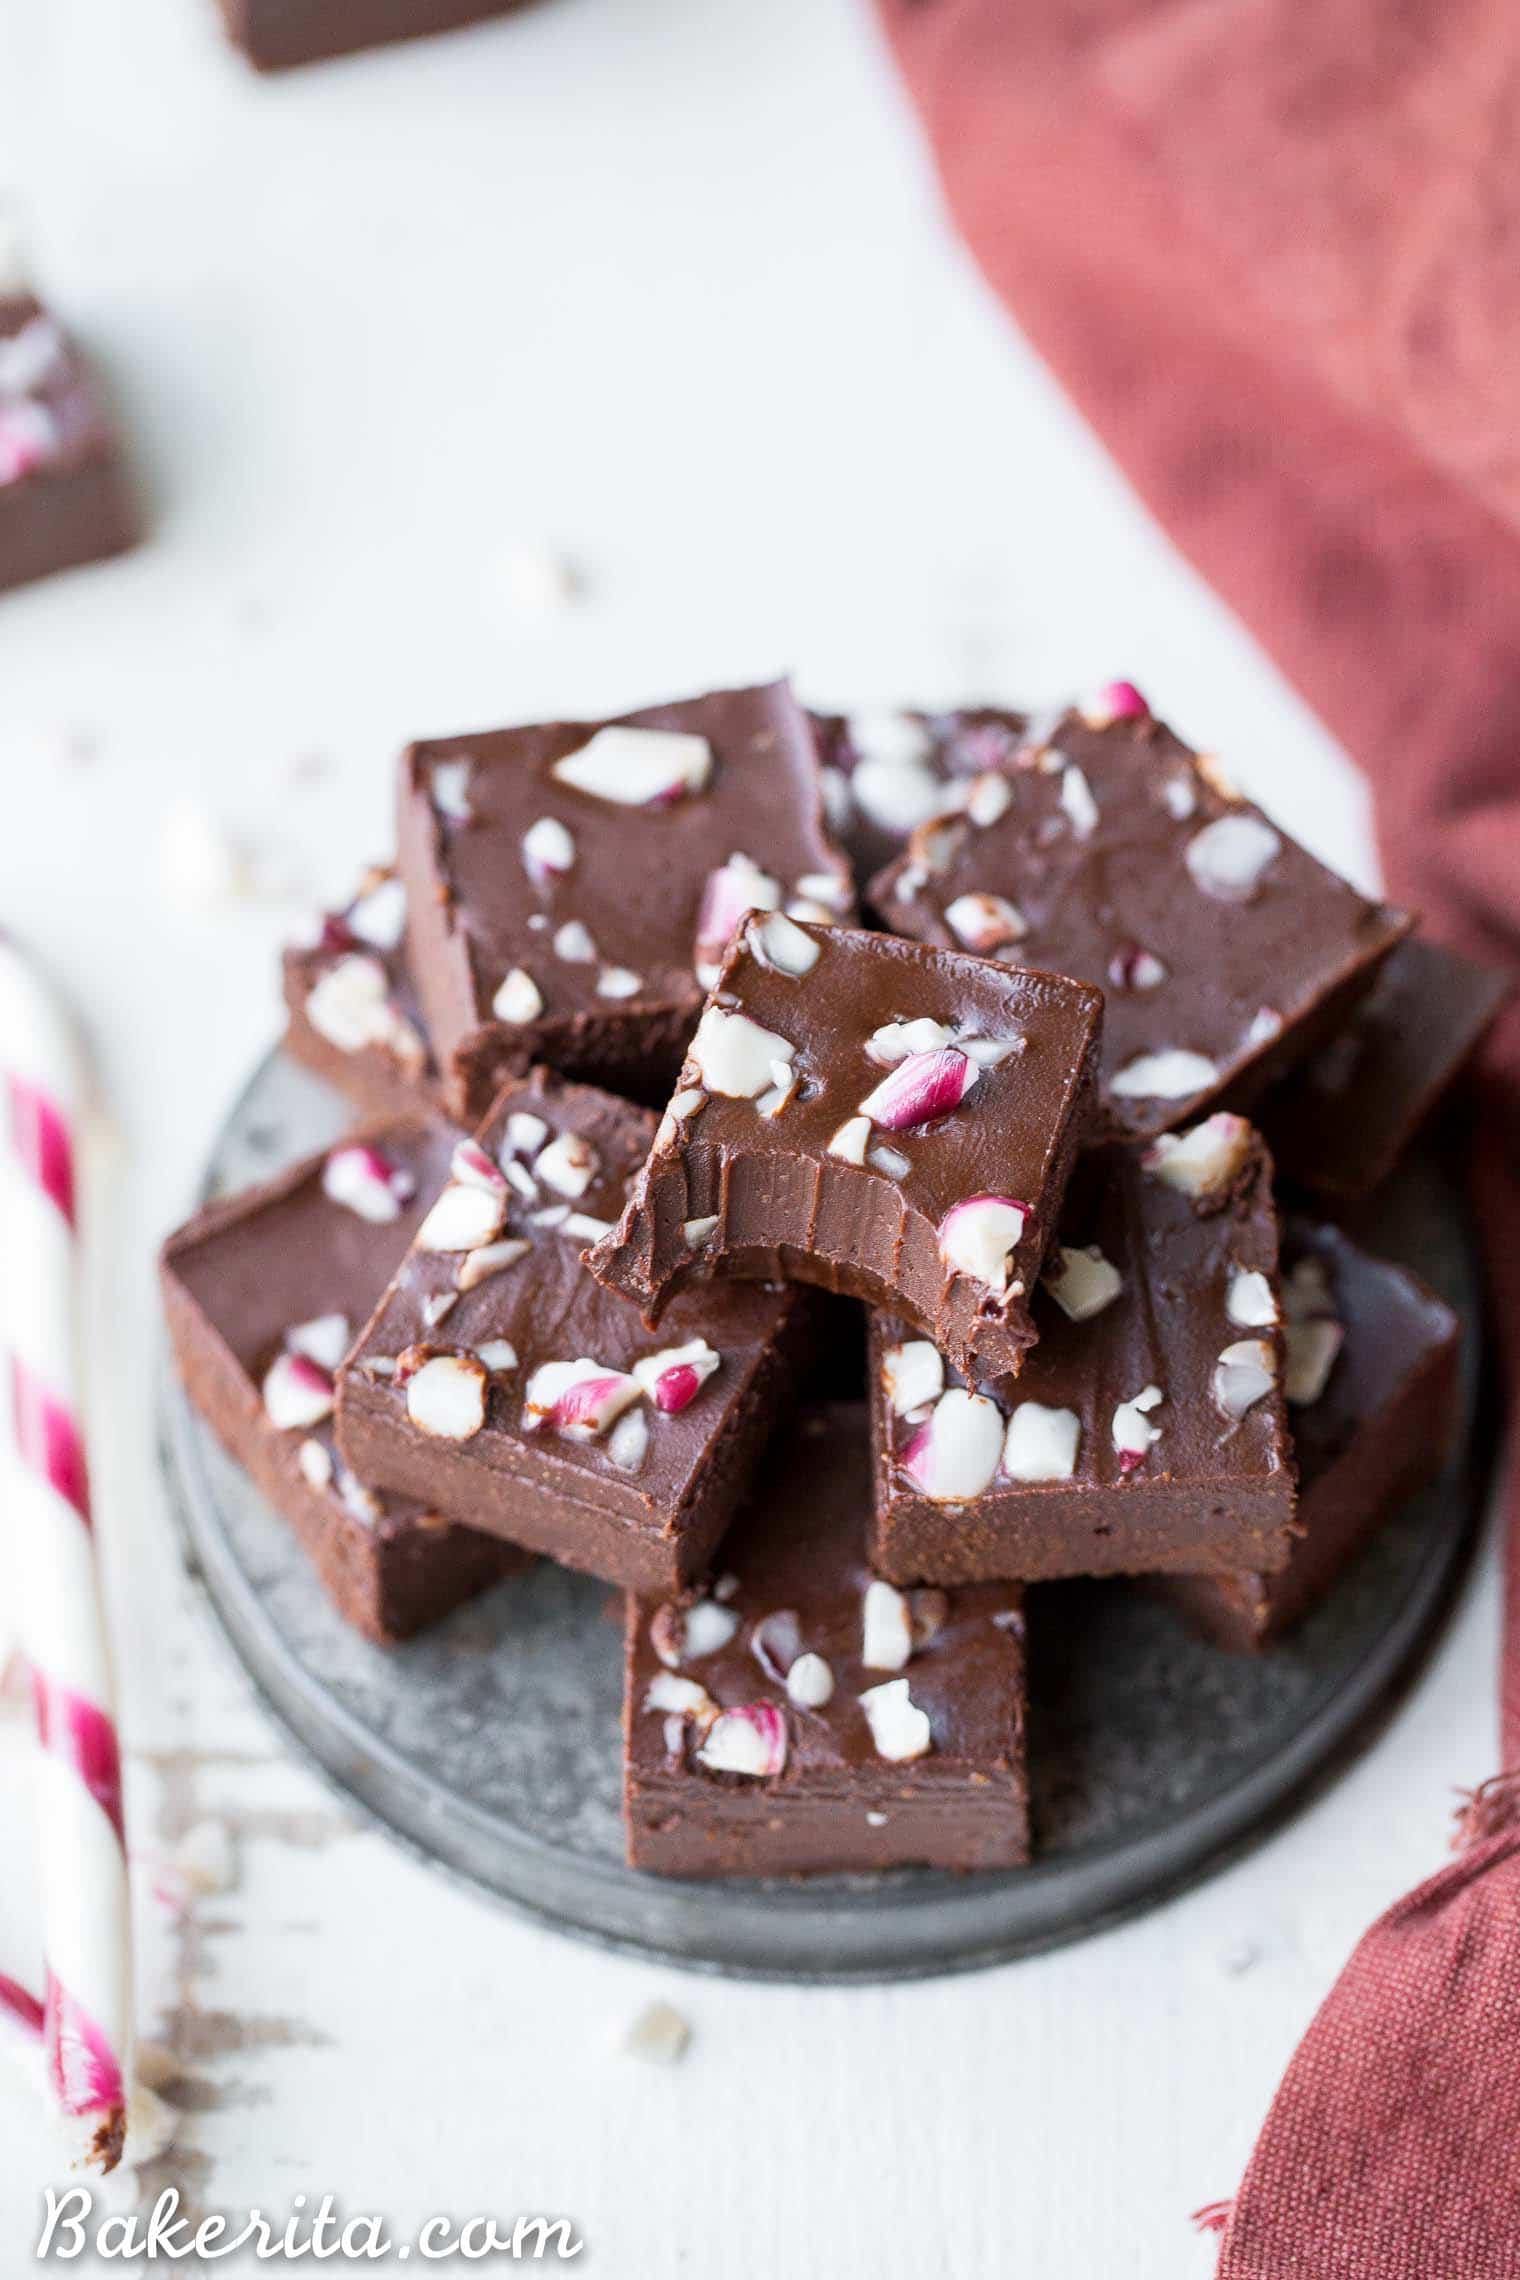 This Easy Chocolate Peppermint Fudge is the perfect, super simple holiday dessert. It's made in just five minutes with only five ingredients, and it's gluten-free, paleo, dairy-free, and vegan. This rich, super chocolatey fudge will melt in your mouth!